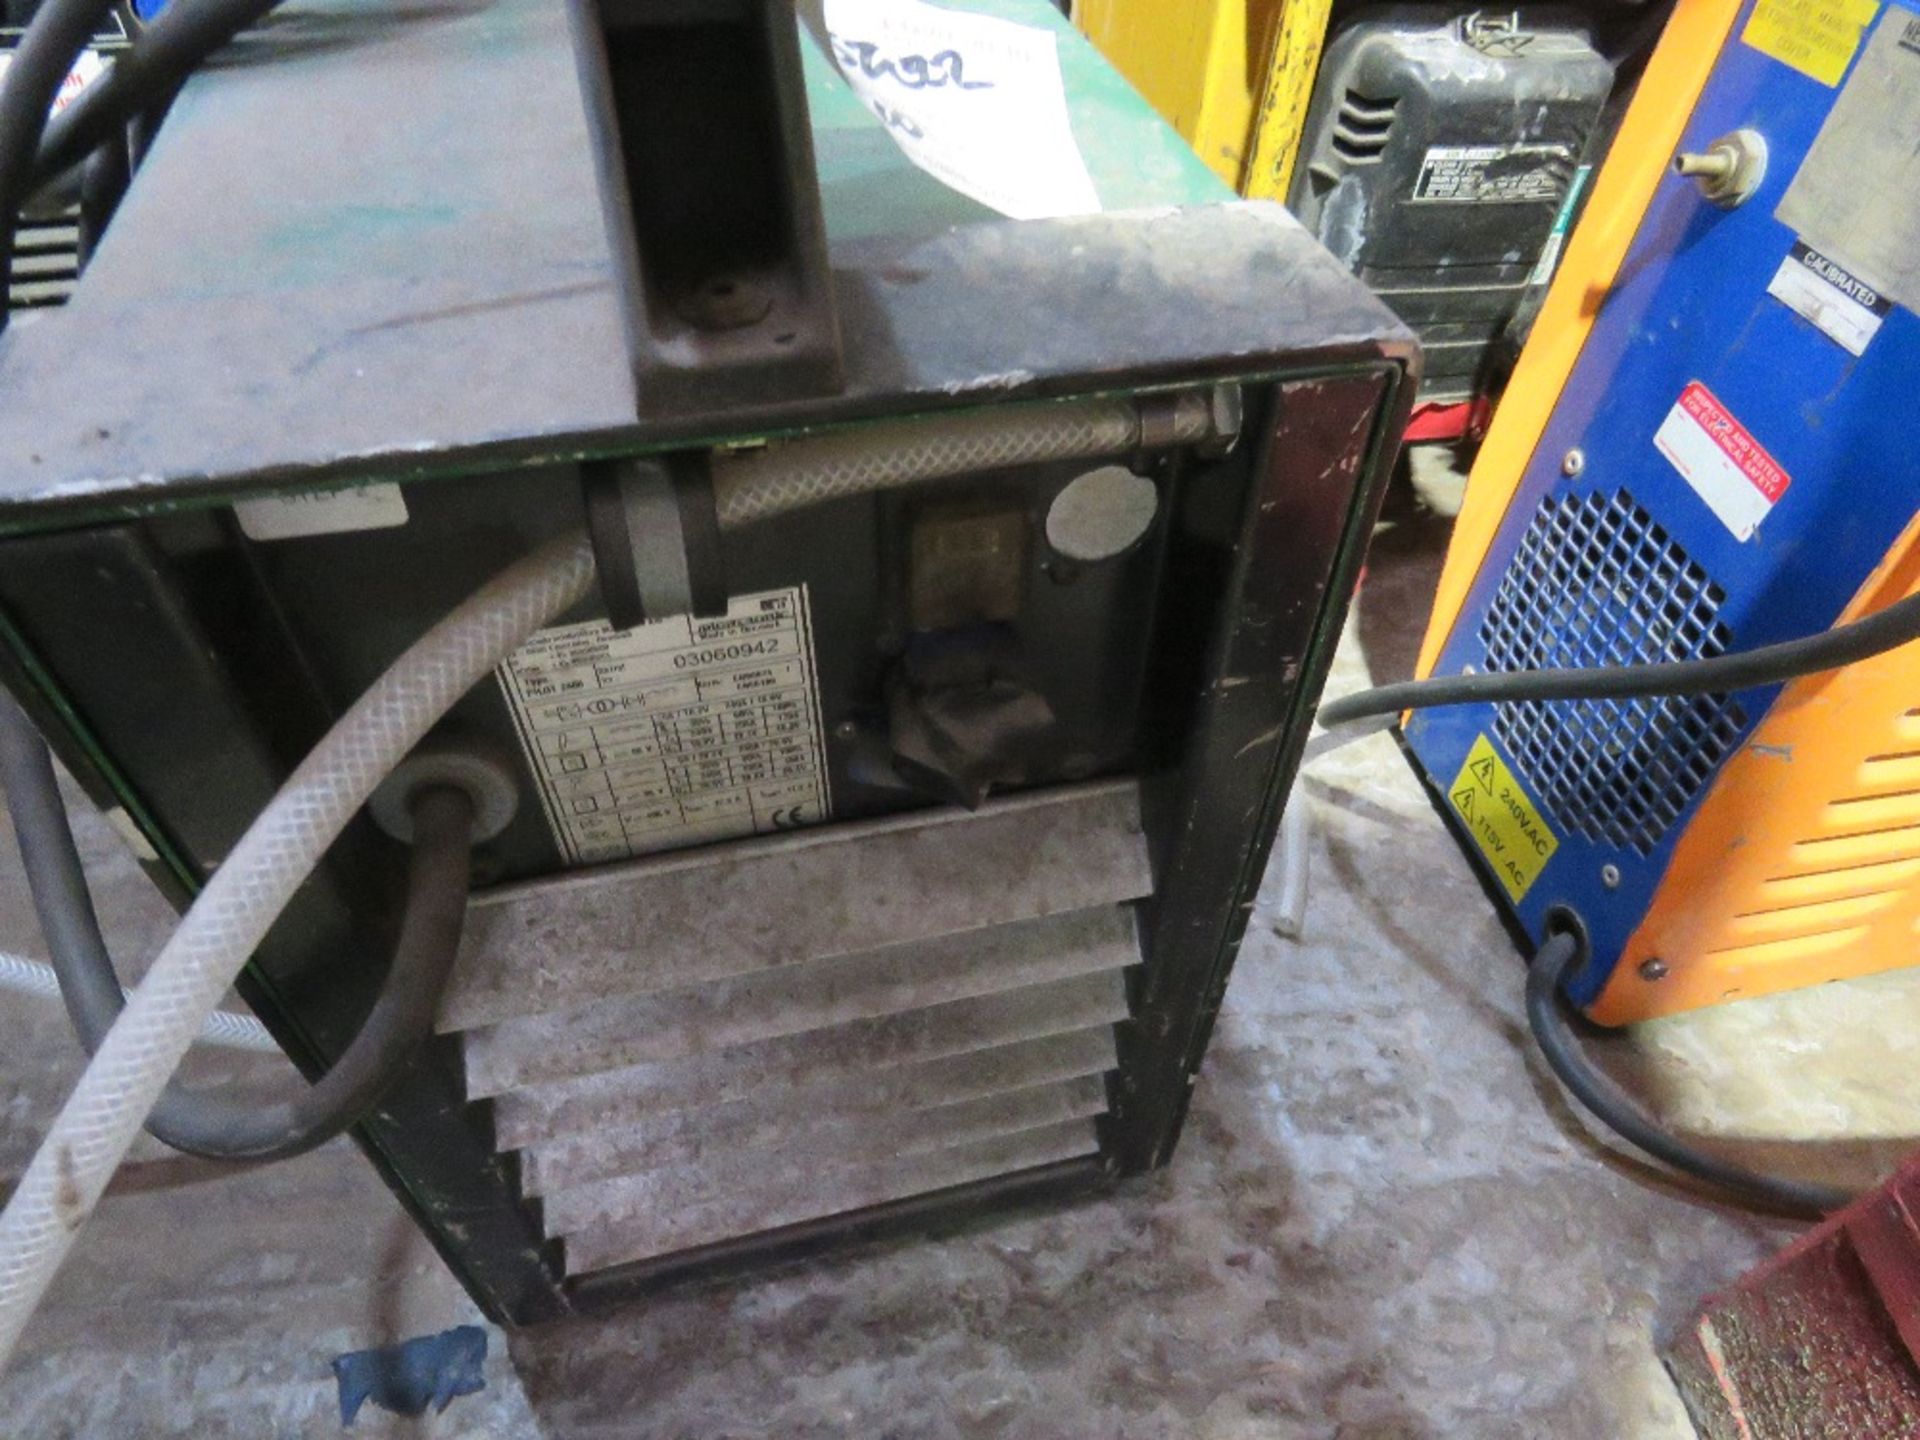 MIGATRONIC PILOT 2400 3 PHASE WELDER. DIRECT FROM LOCAL COMPANY. SURPLUS TO REQUIREMENTS. - Image 4 of 5